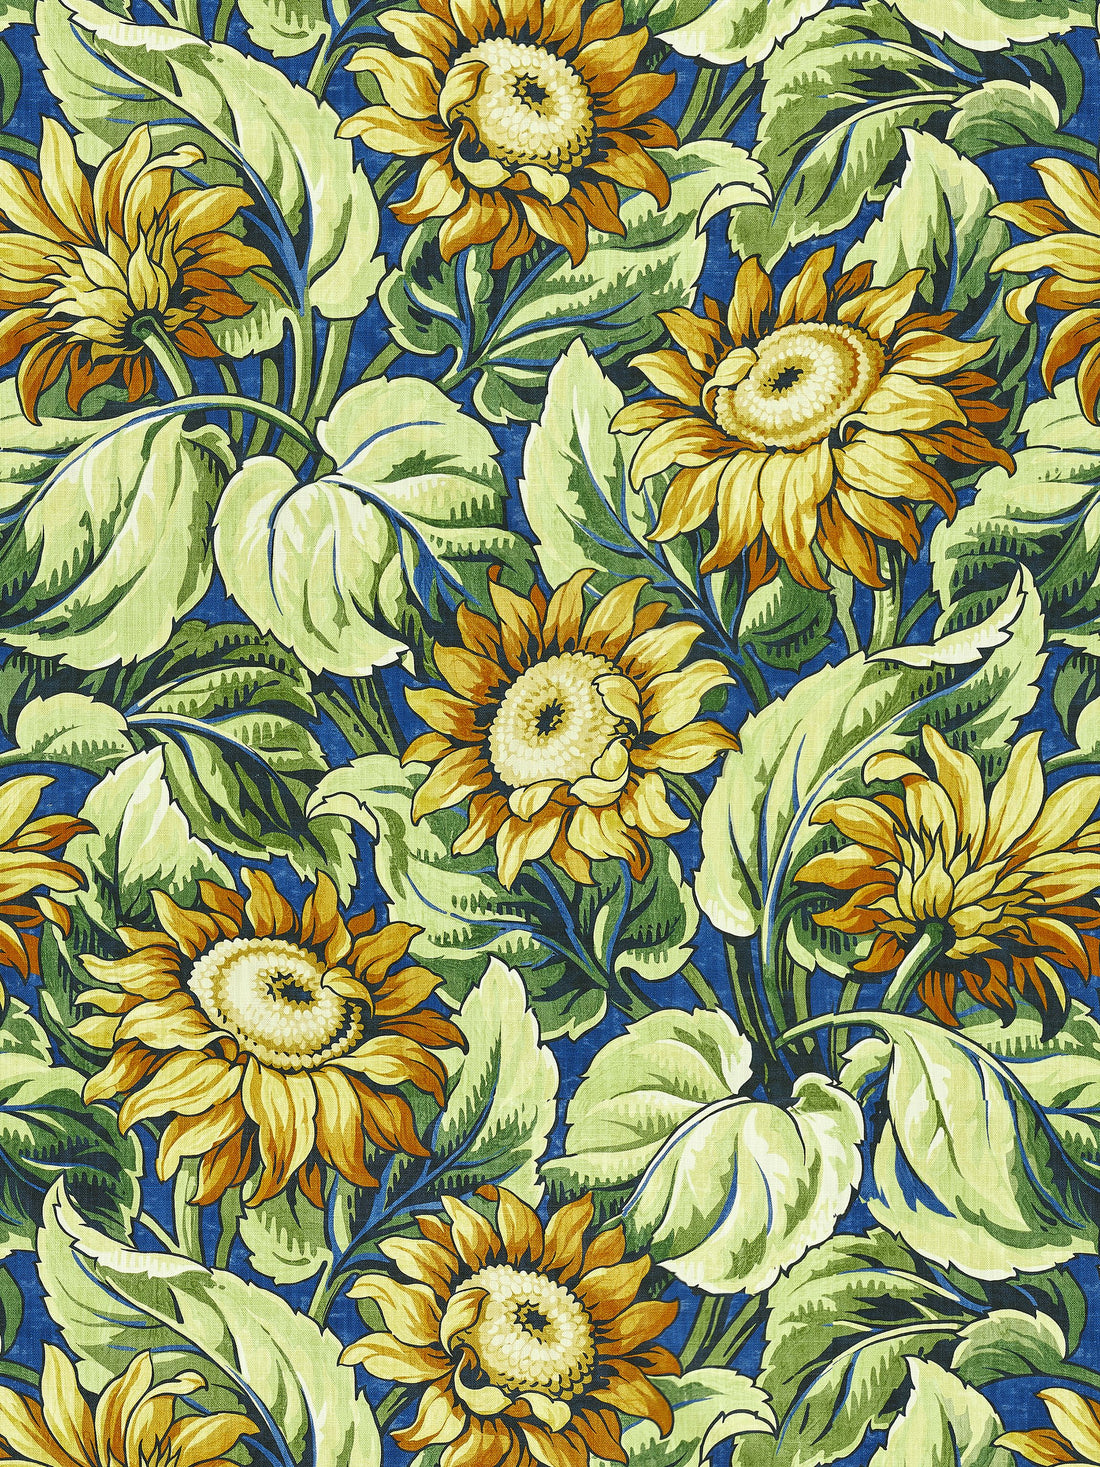 Sunflower Print fabric in cobalt color - pattern number GW 000216631 - by Scalamandre in the Grey Watkins collection